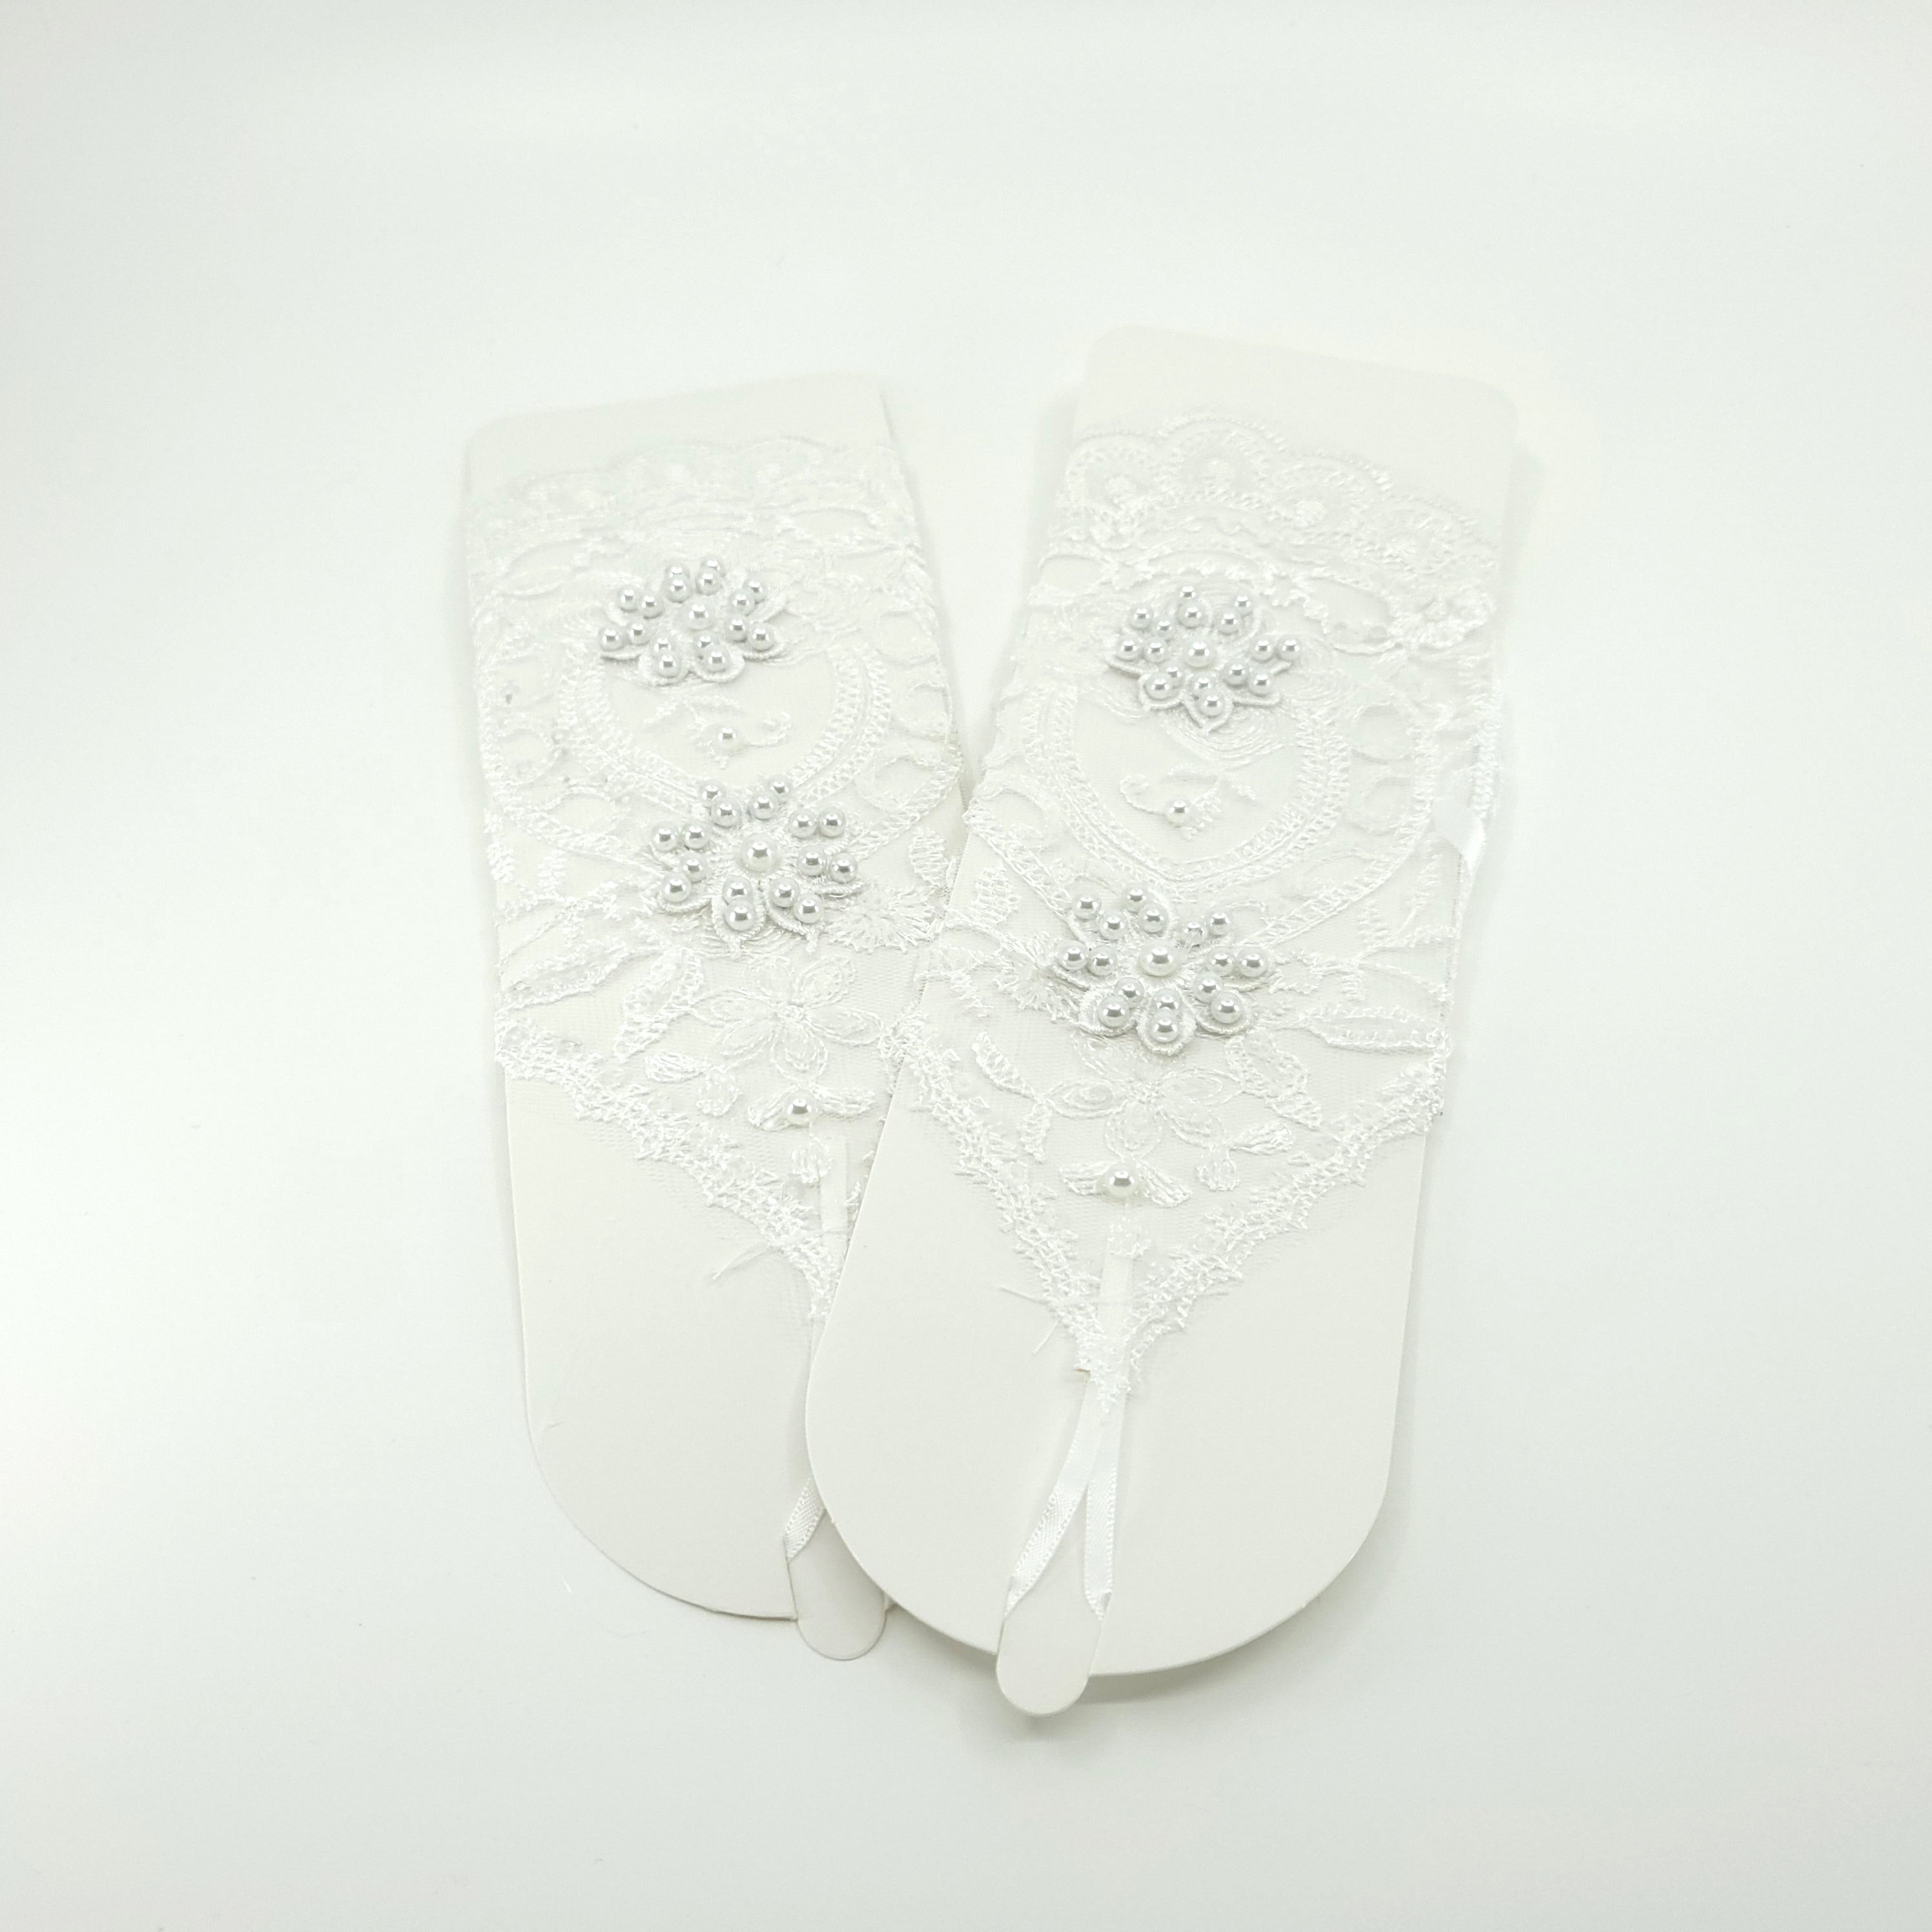 WEDDING GLOVE LACE UP FINGERLESS FLORAL 225 (12PC)